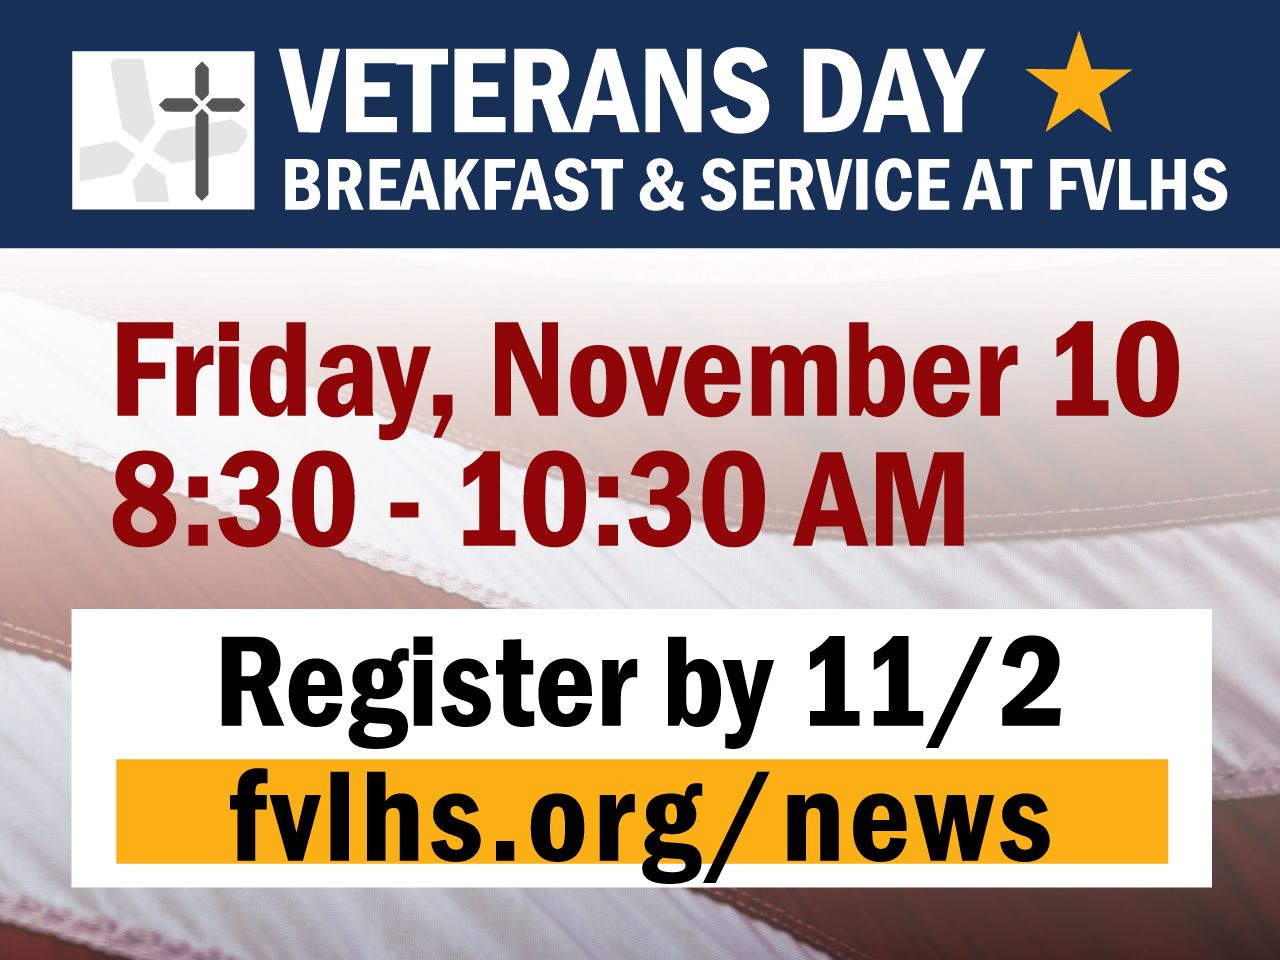 Veterans Day Breakfast and Service at FVL on Nov. 10 at 8:30 - register by 11/2 at fvlhs.org/news